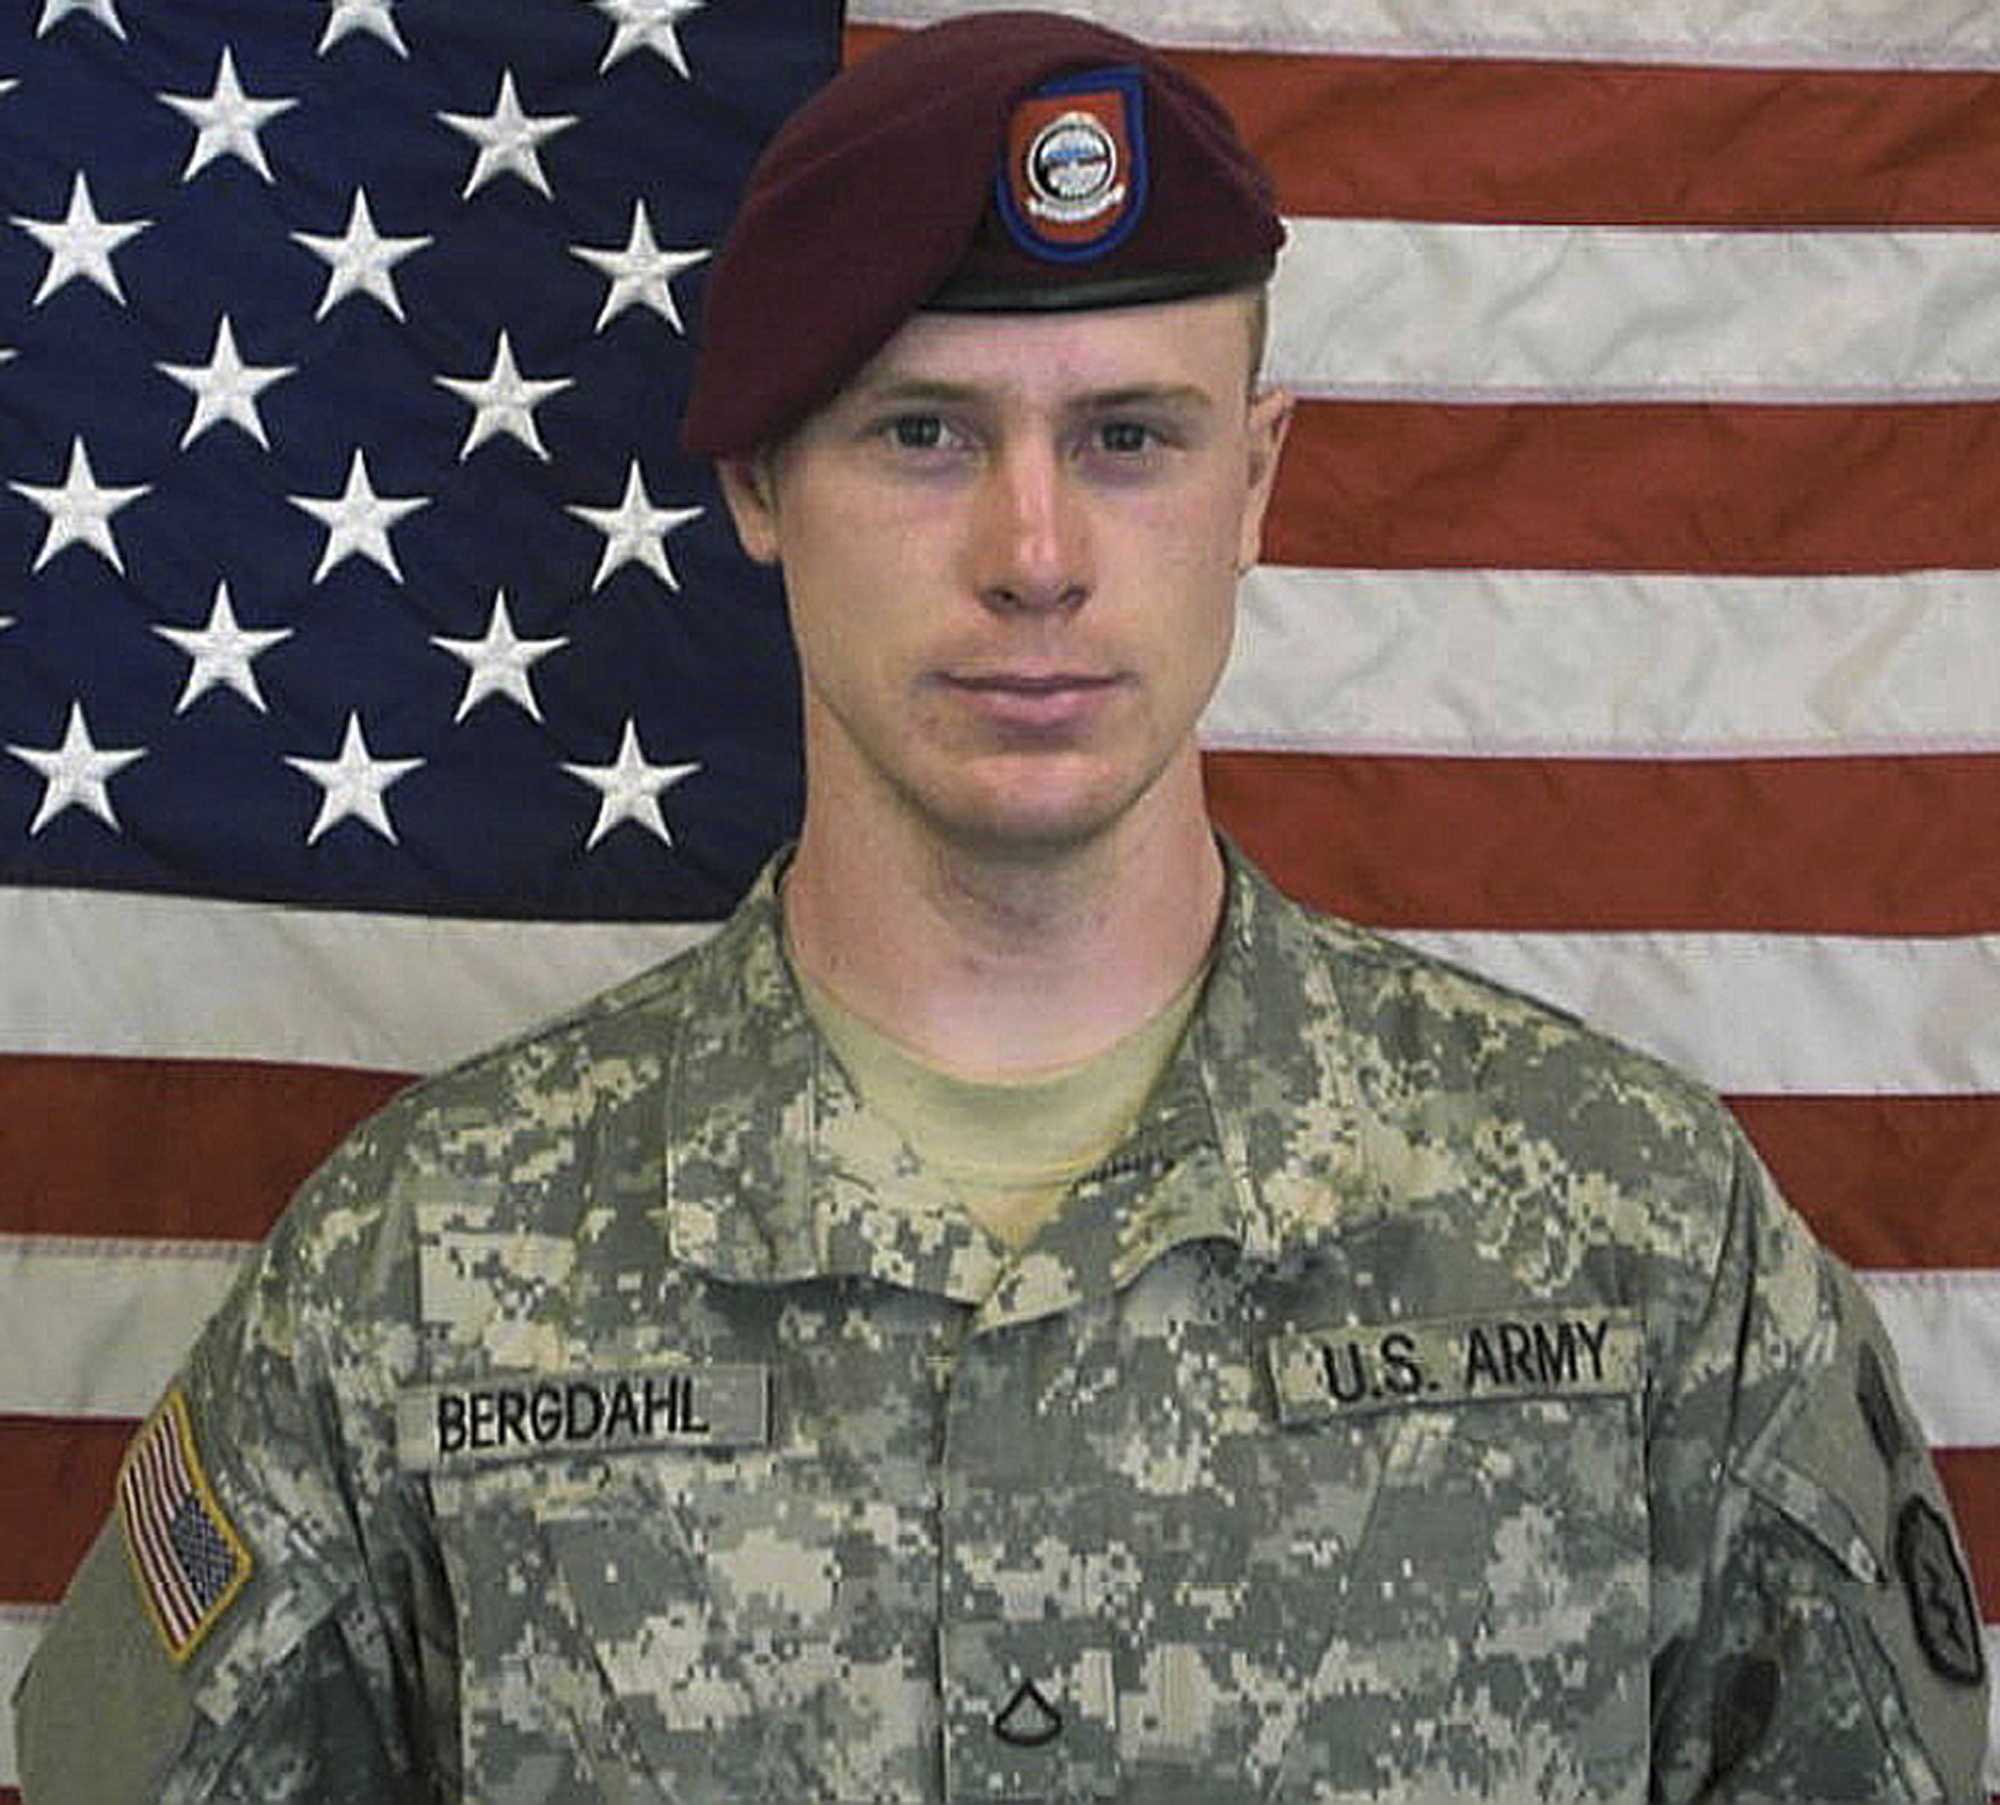 PHOTO: This undated image provided by the U.S. Army shows Sgt. Bowe Bergdahl.